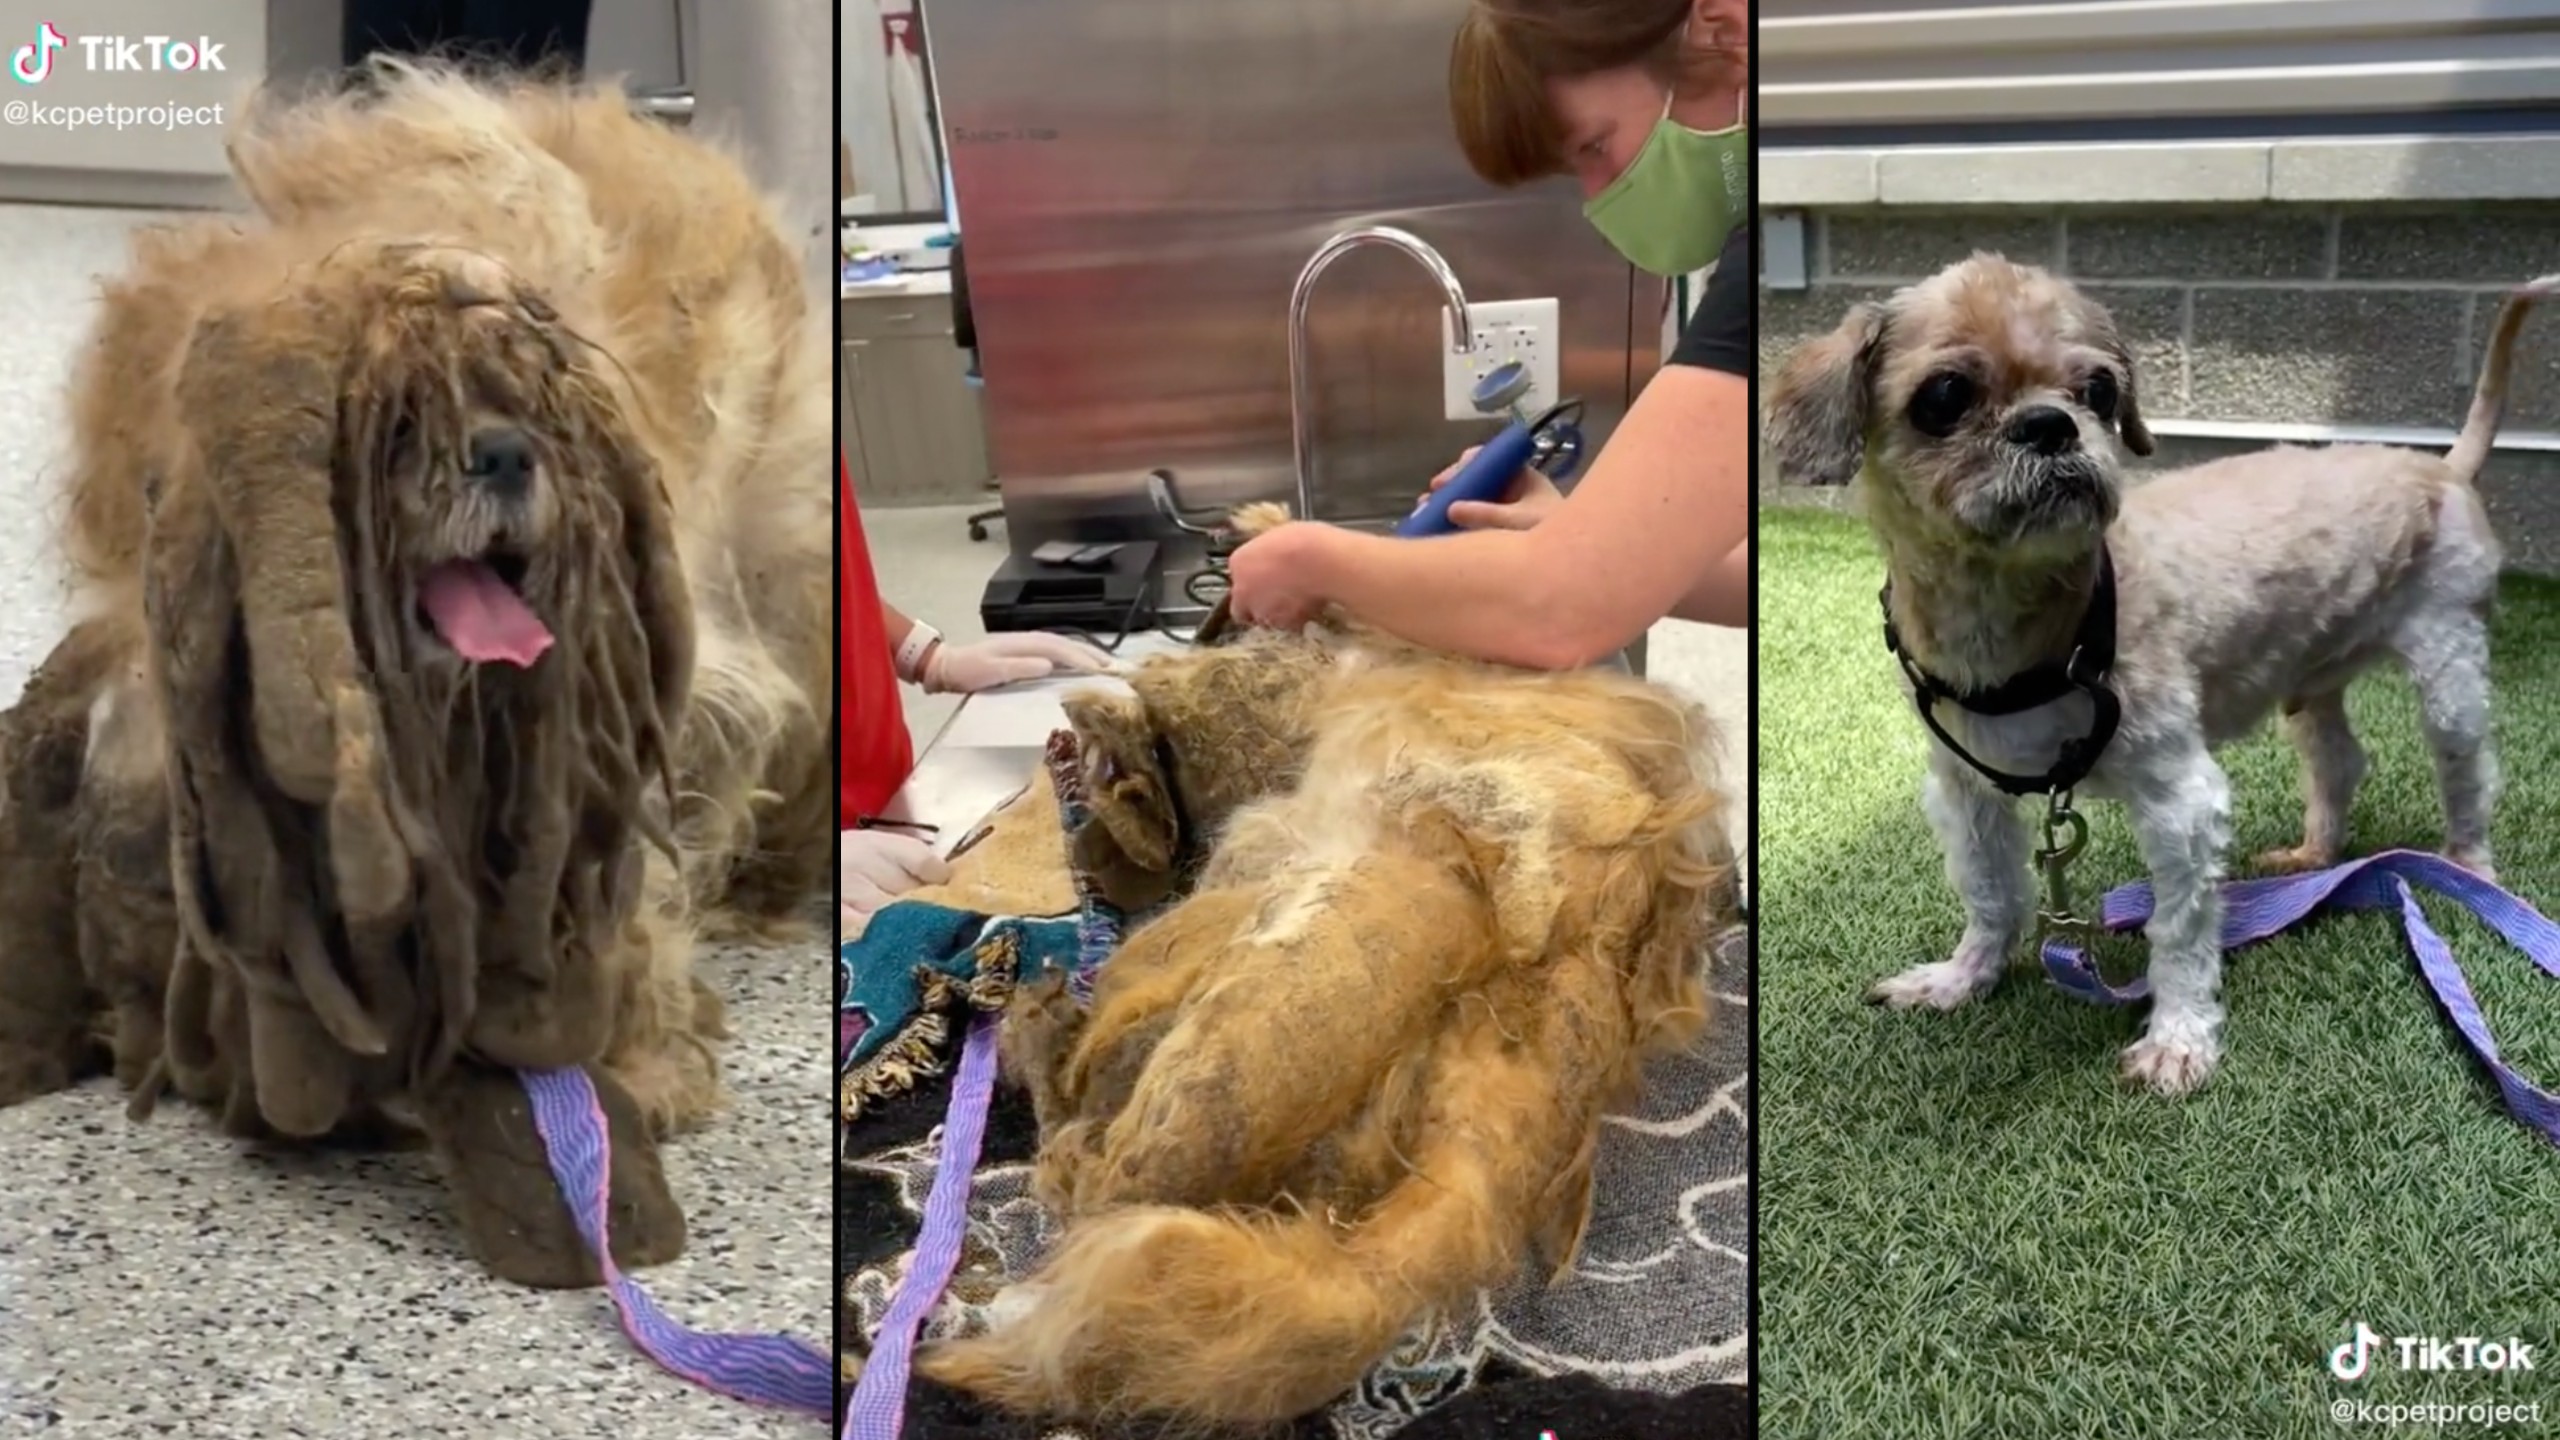 Hero vets shave off 6 lbs of matted fur from stray dog